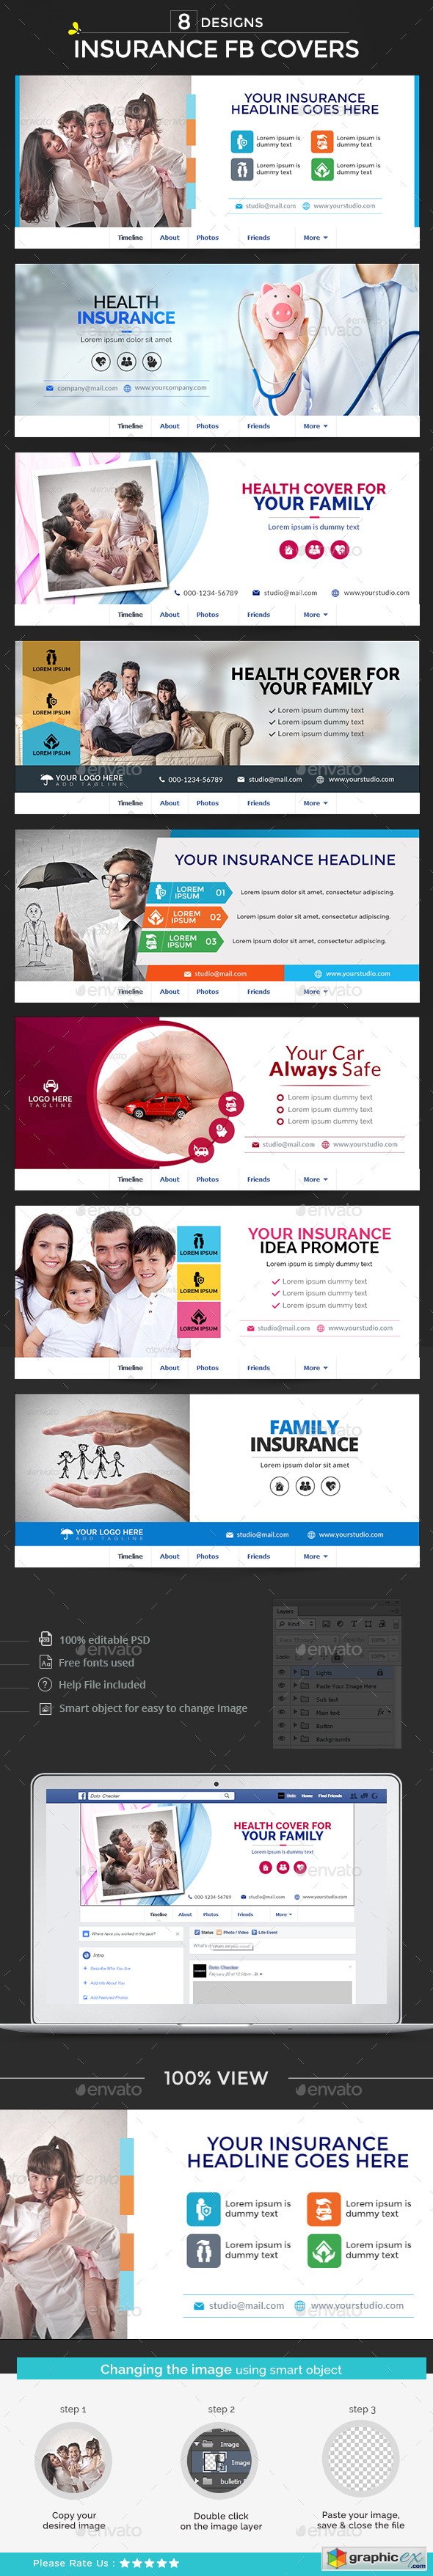 Insurance Facebook Covers - 8 Designs